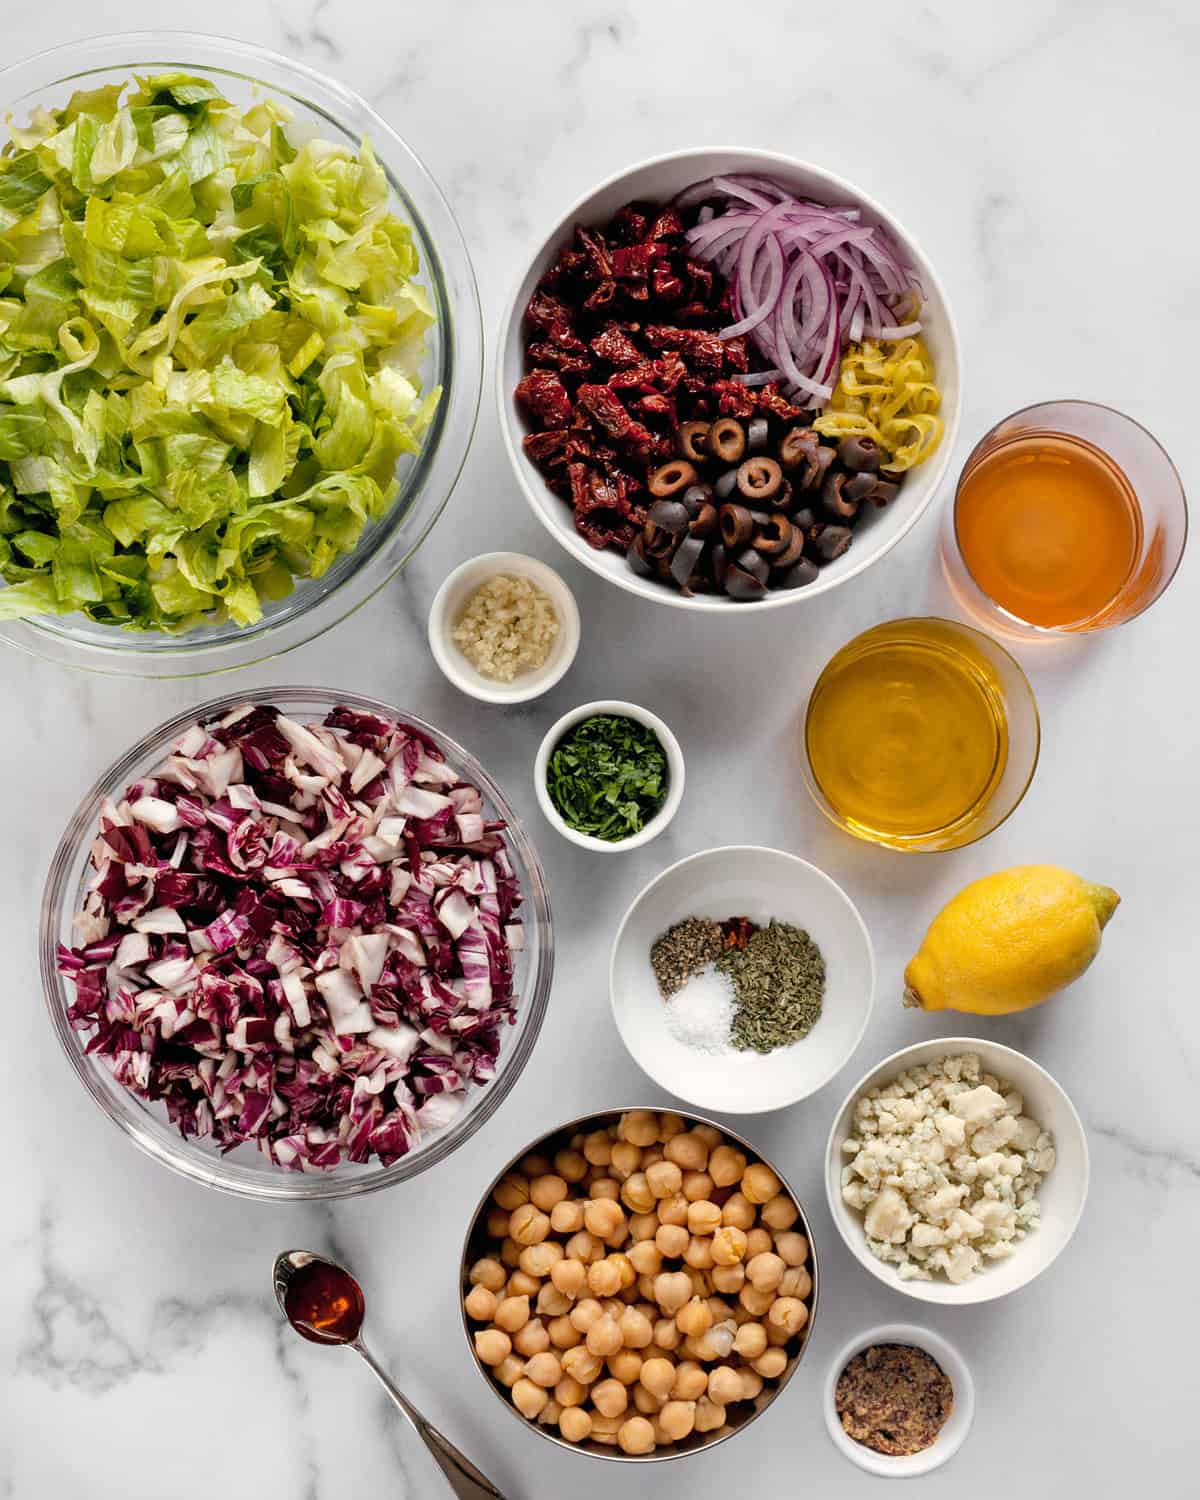 Ingredients including romaine, radicchio, chickpeas, red onions, sun-dried tomatoes, pepperoncini, olives, gorgonzola and parsley